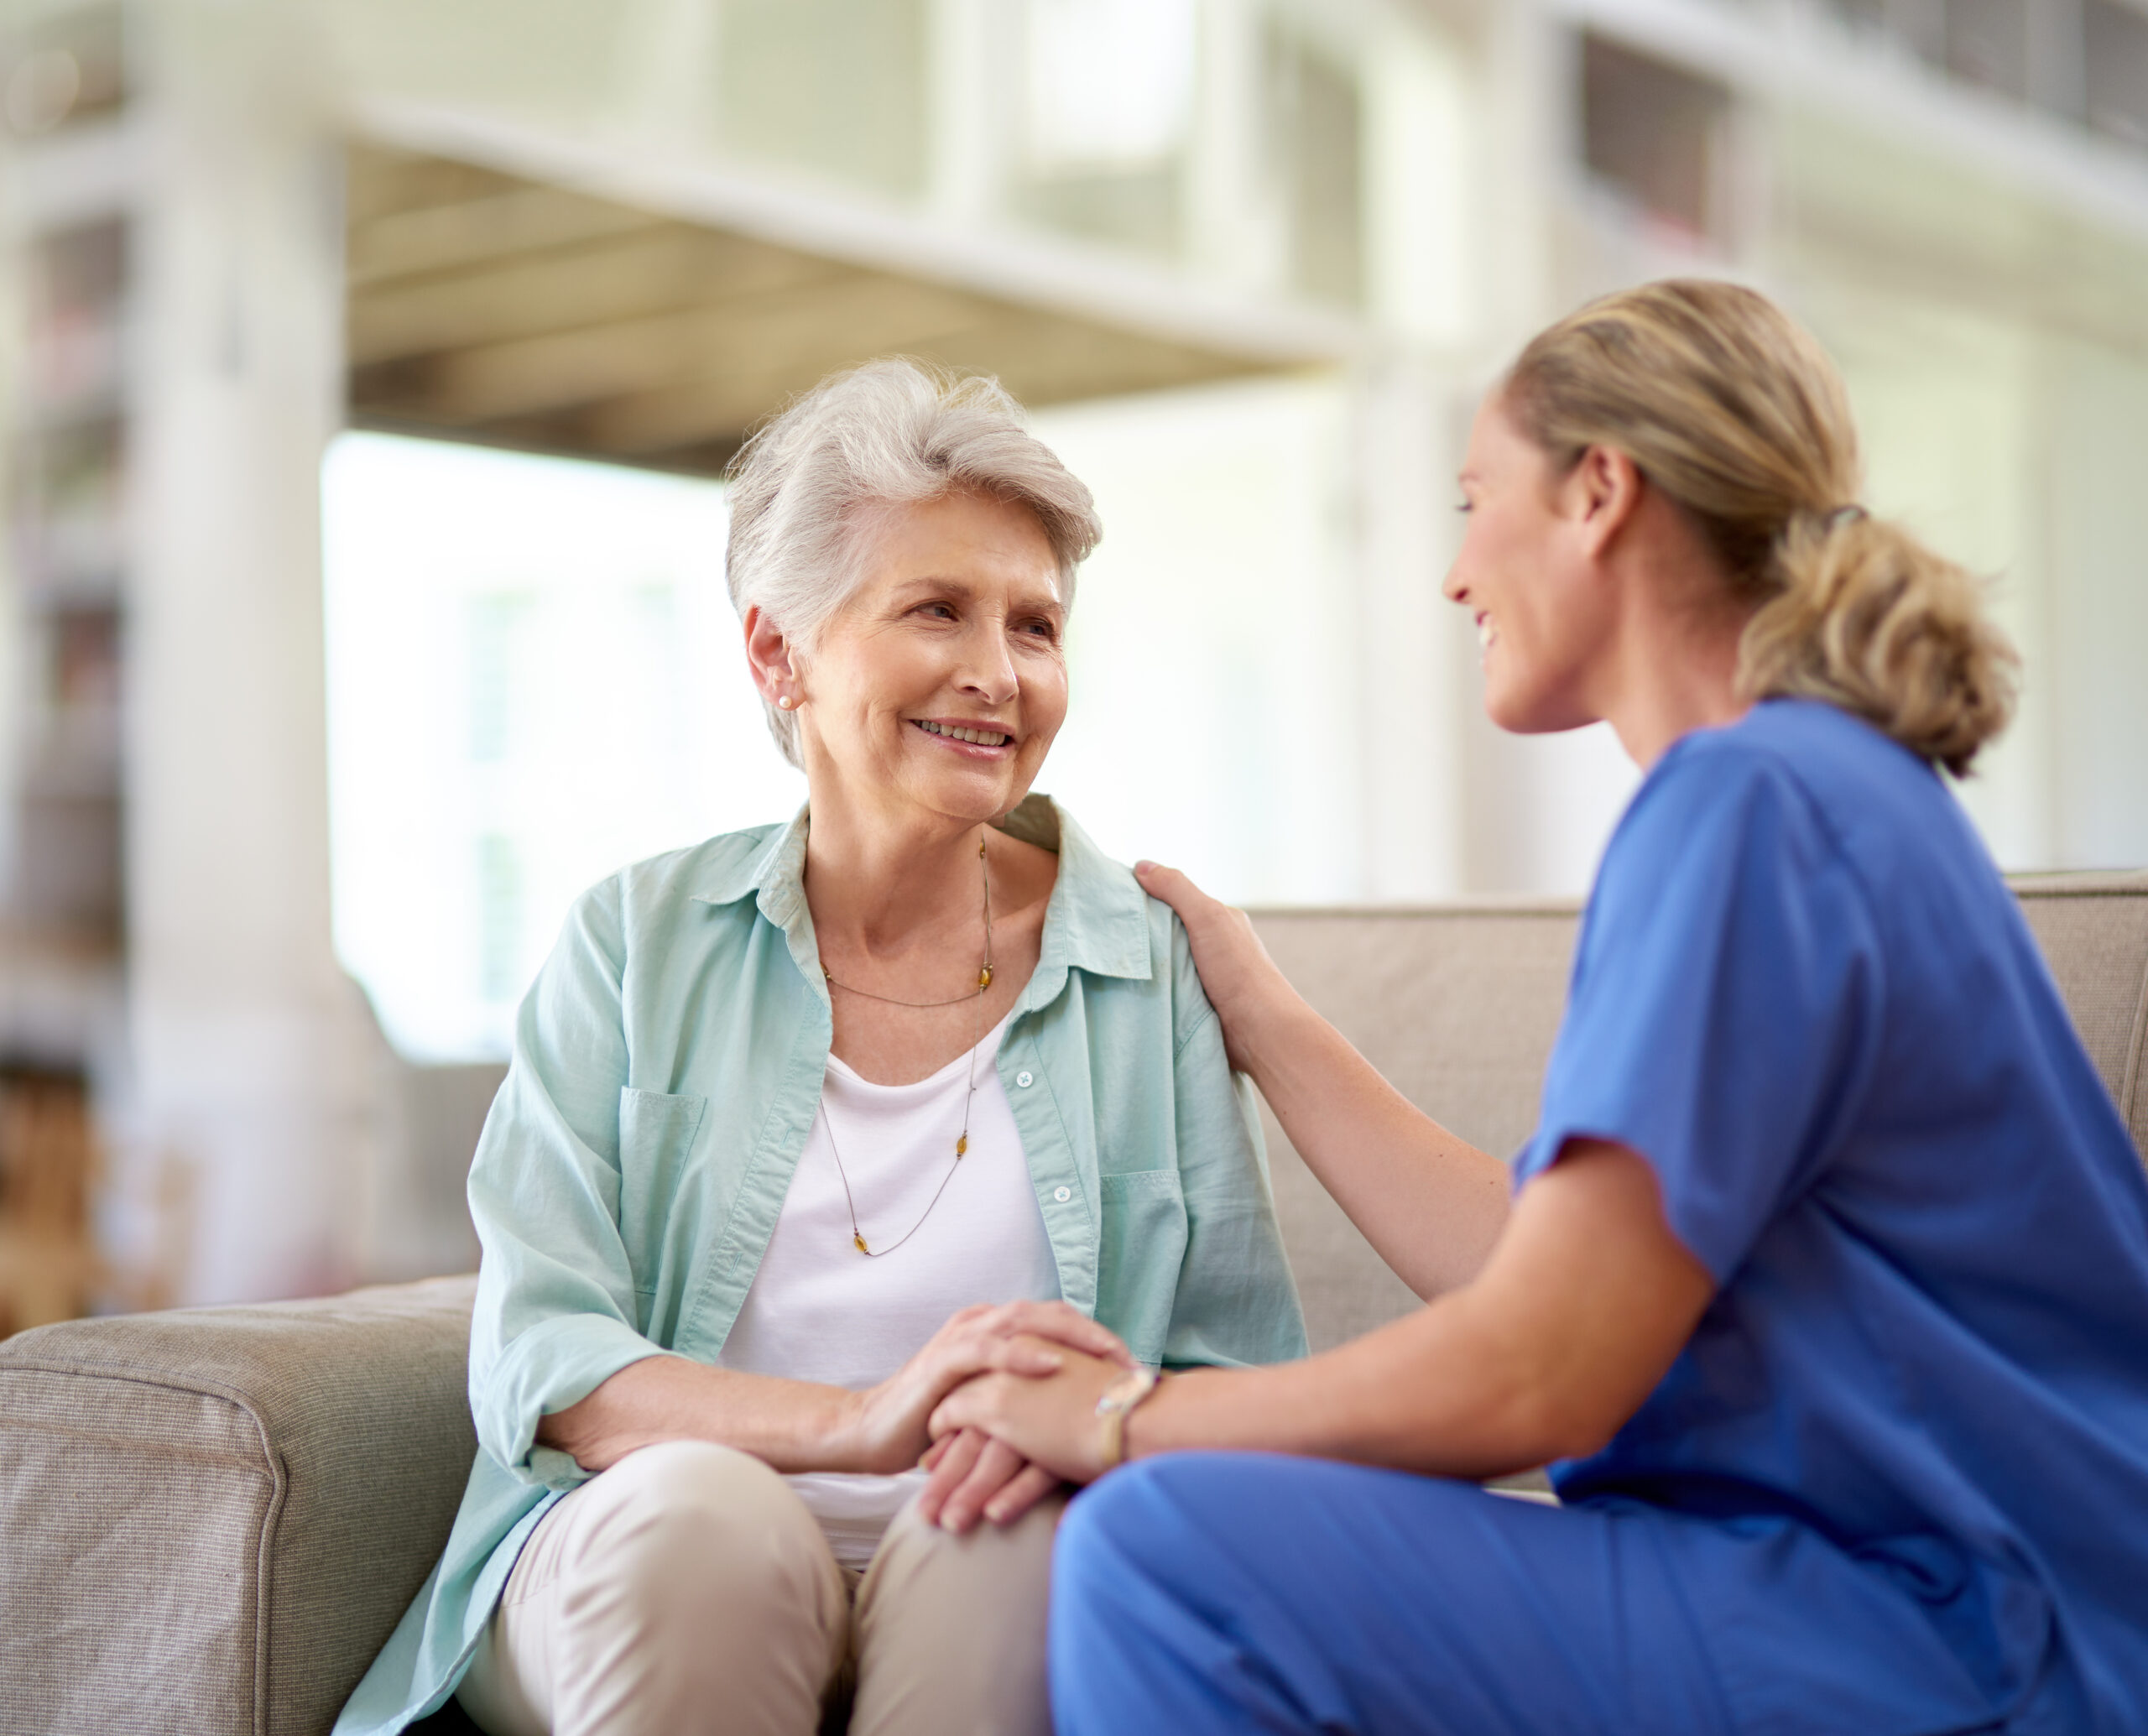 Older adult woman with her caregiver